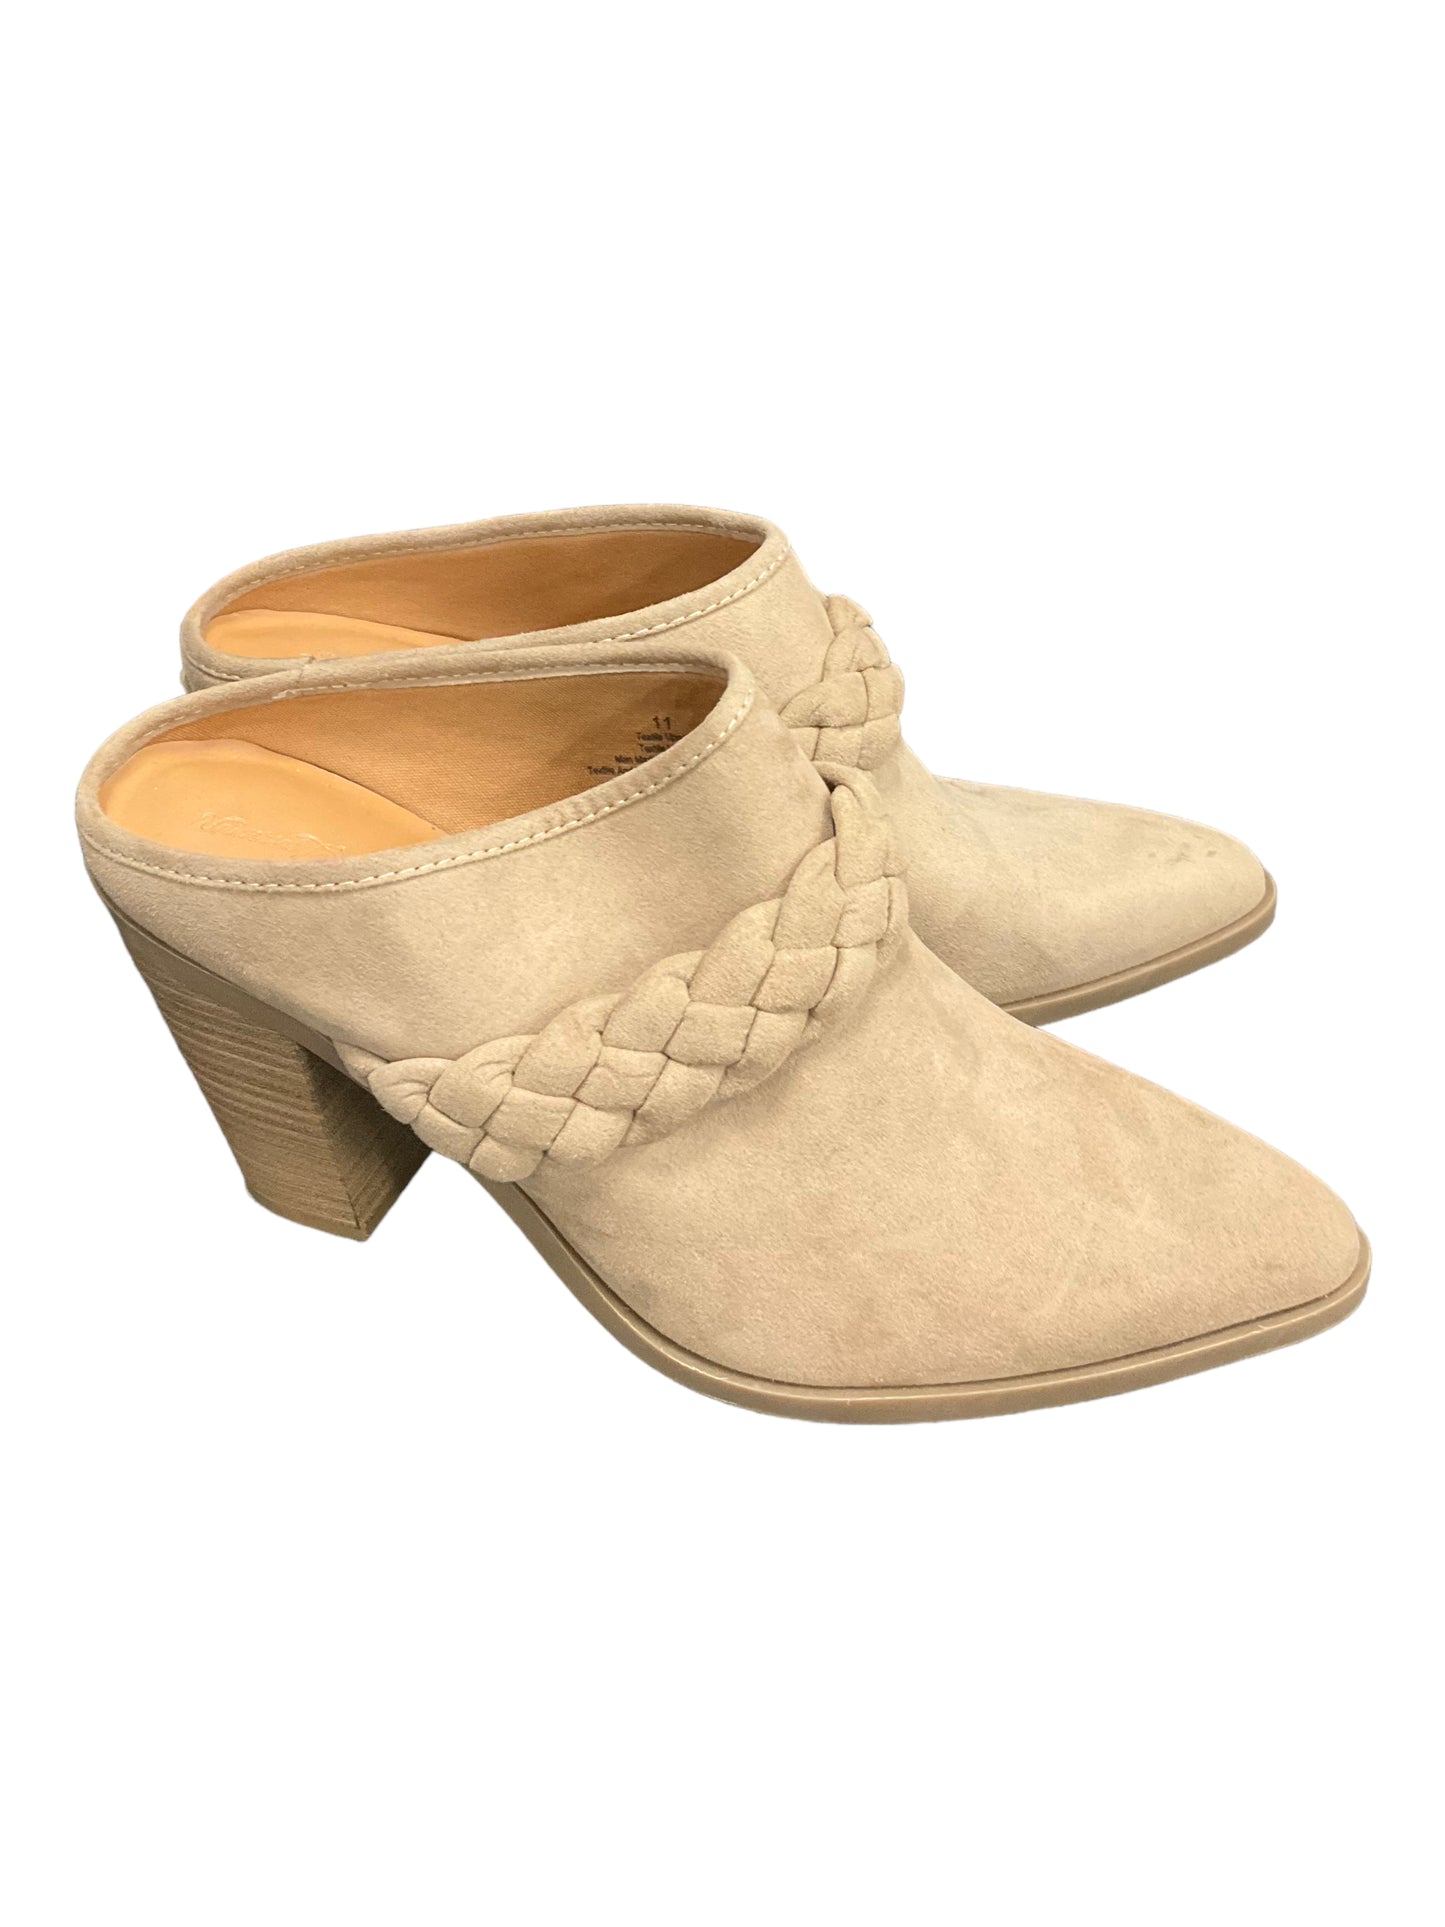 Boots Ankle Heels By Universal Thread  Size: 11